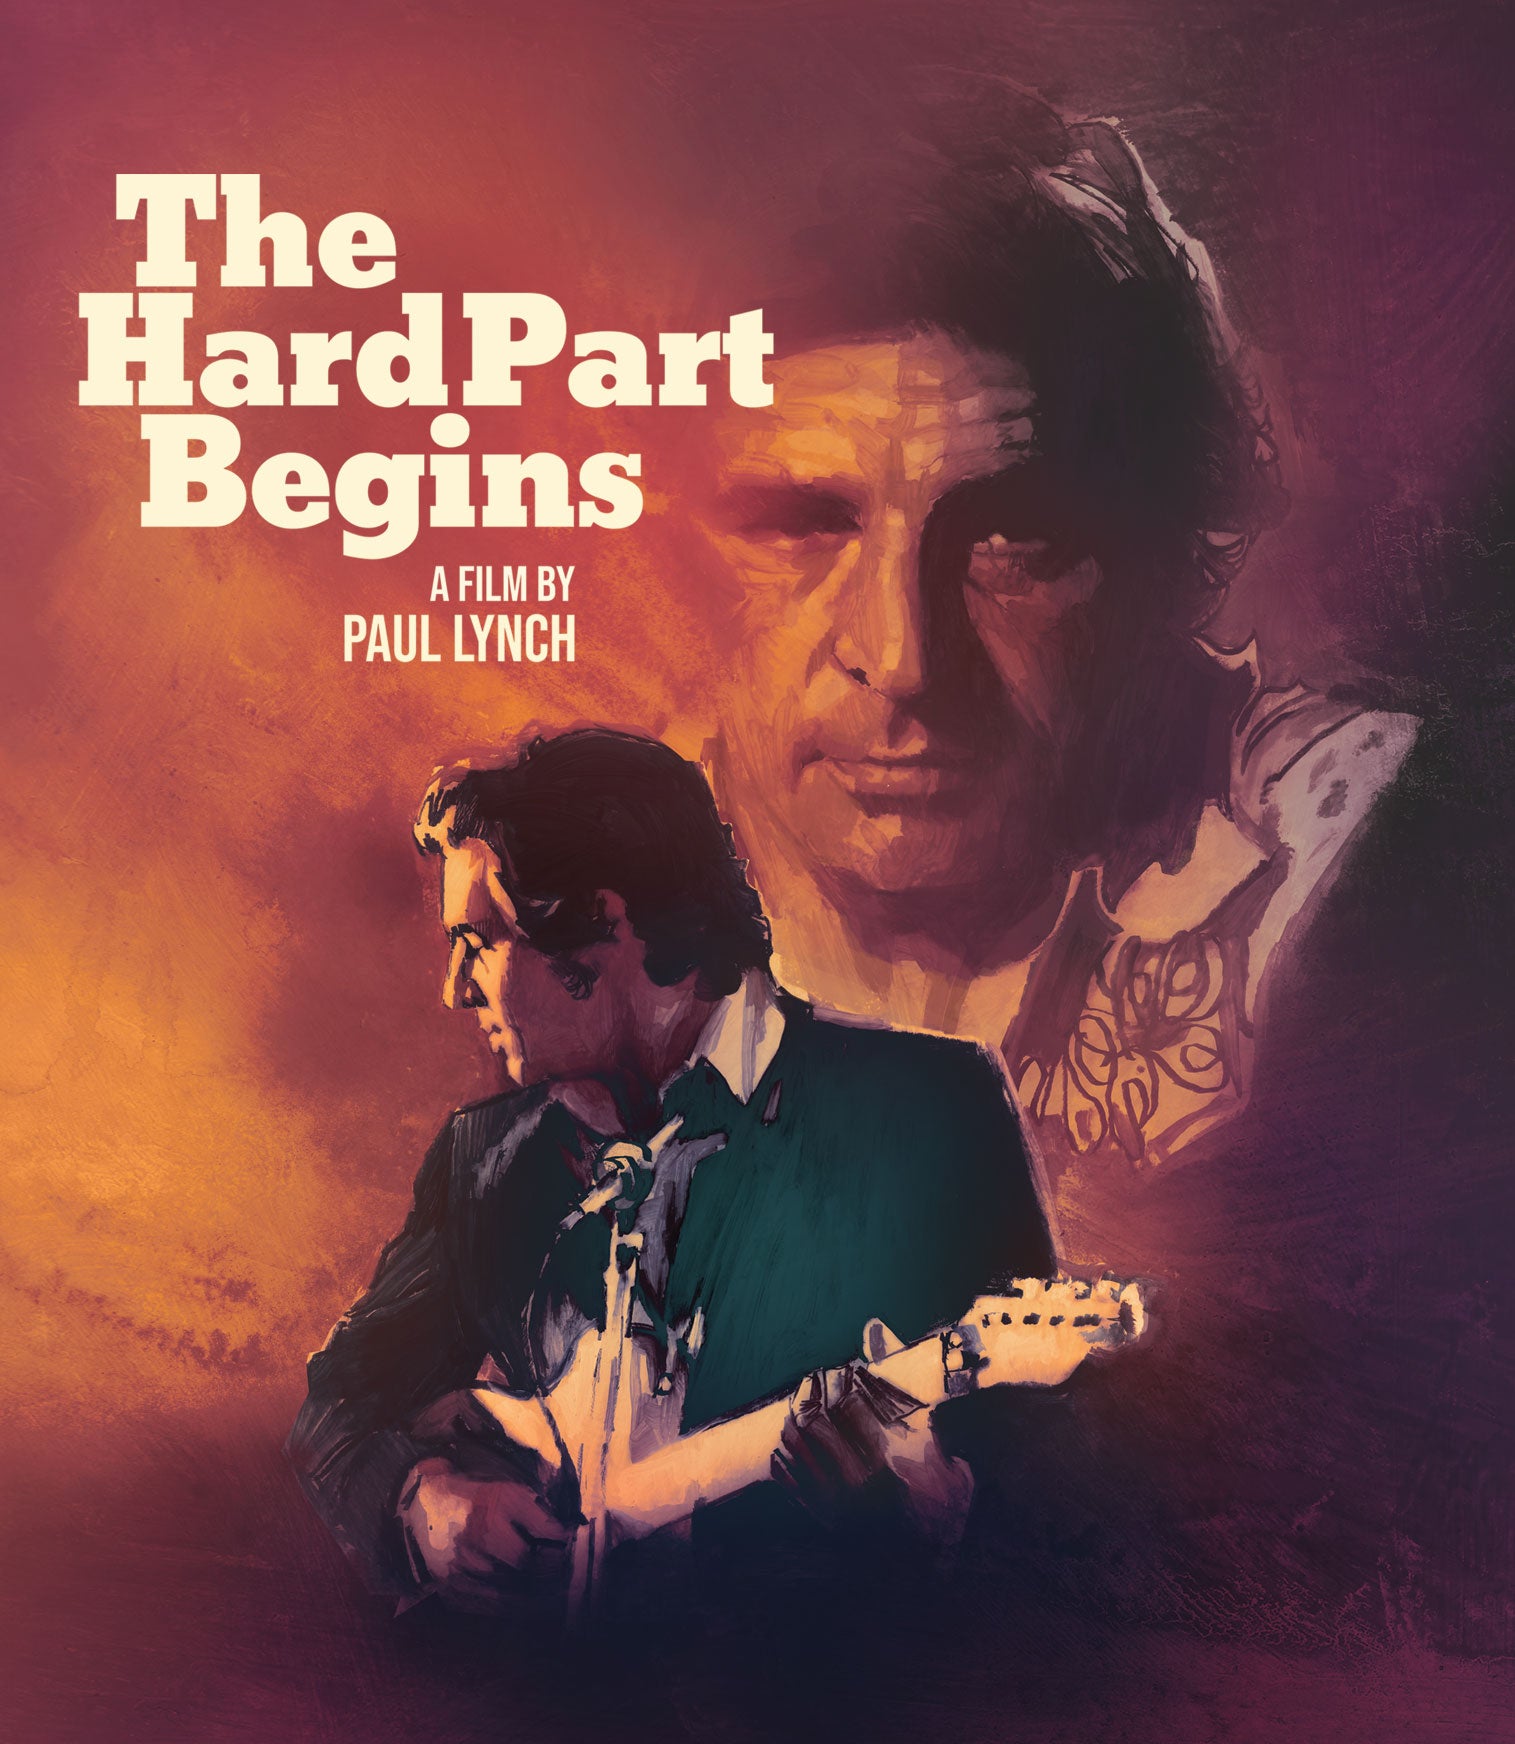 THE HARD PART BEGINS BLU-RAY